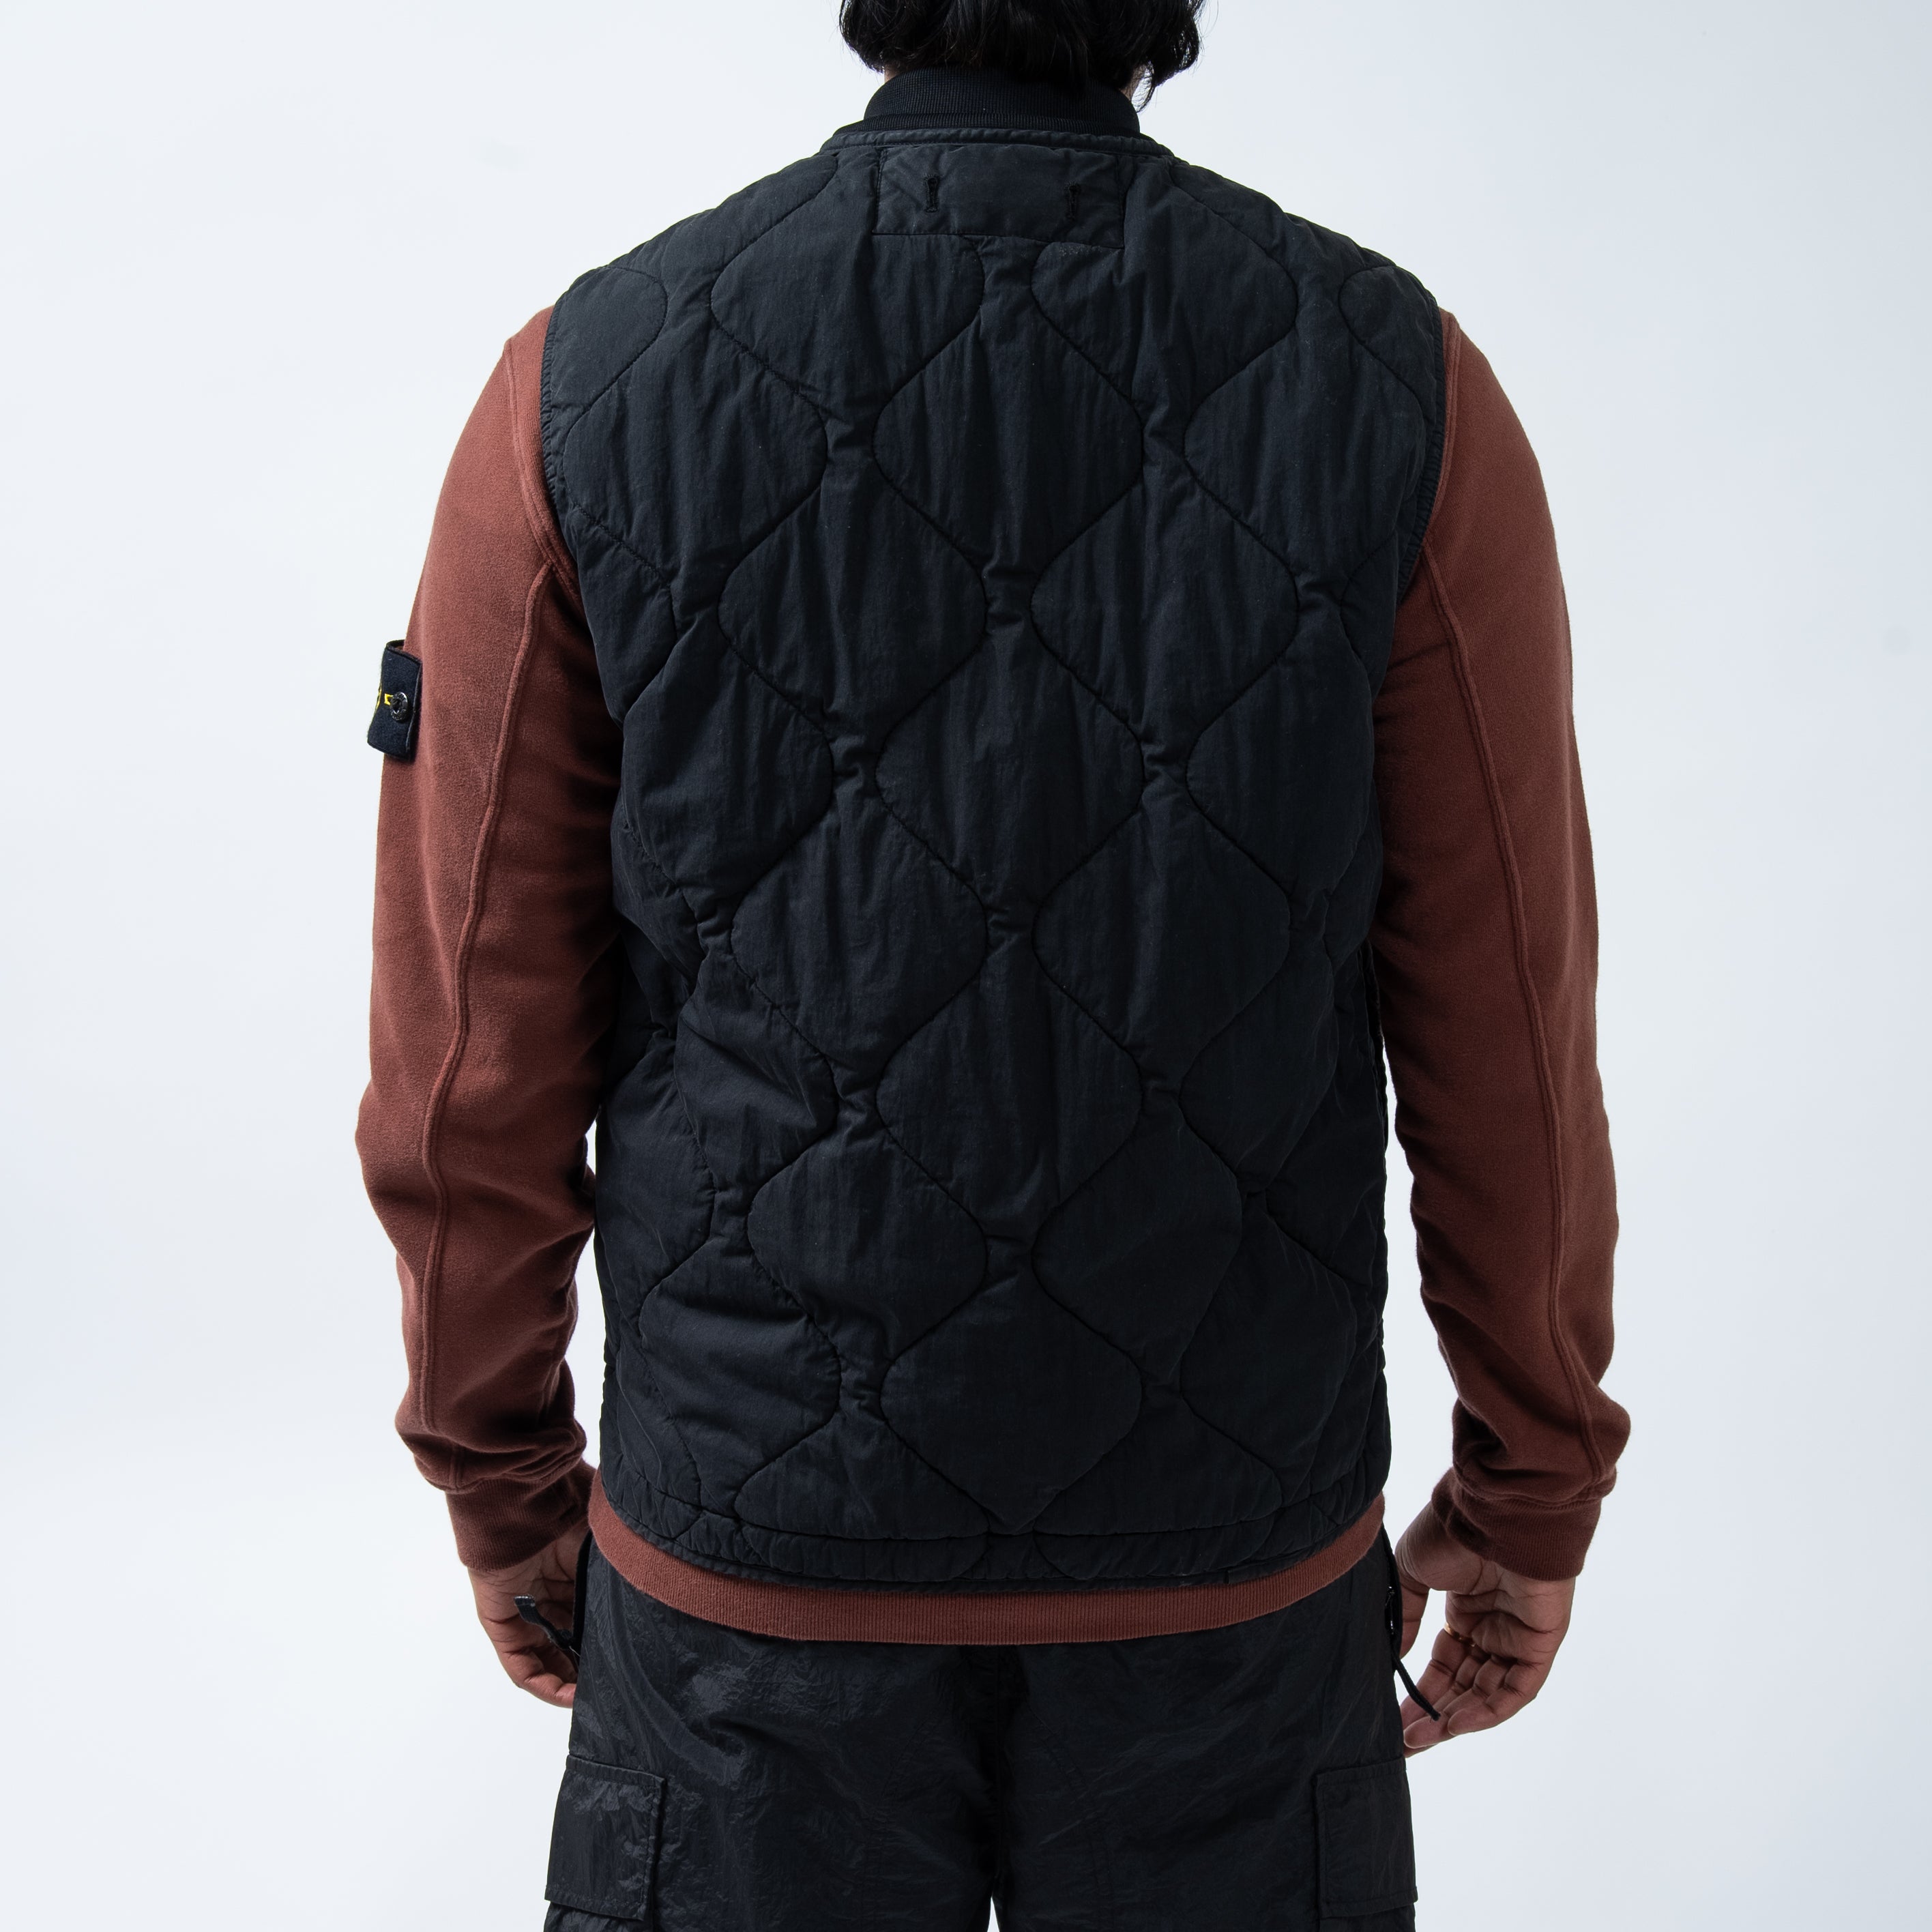 GILET QUILTED DOUBLE POCKET BLACK 2979